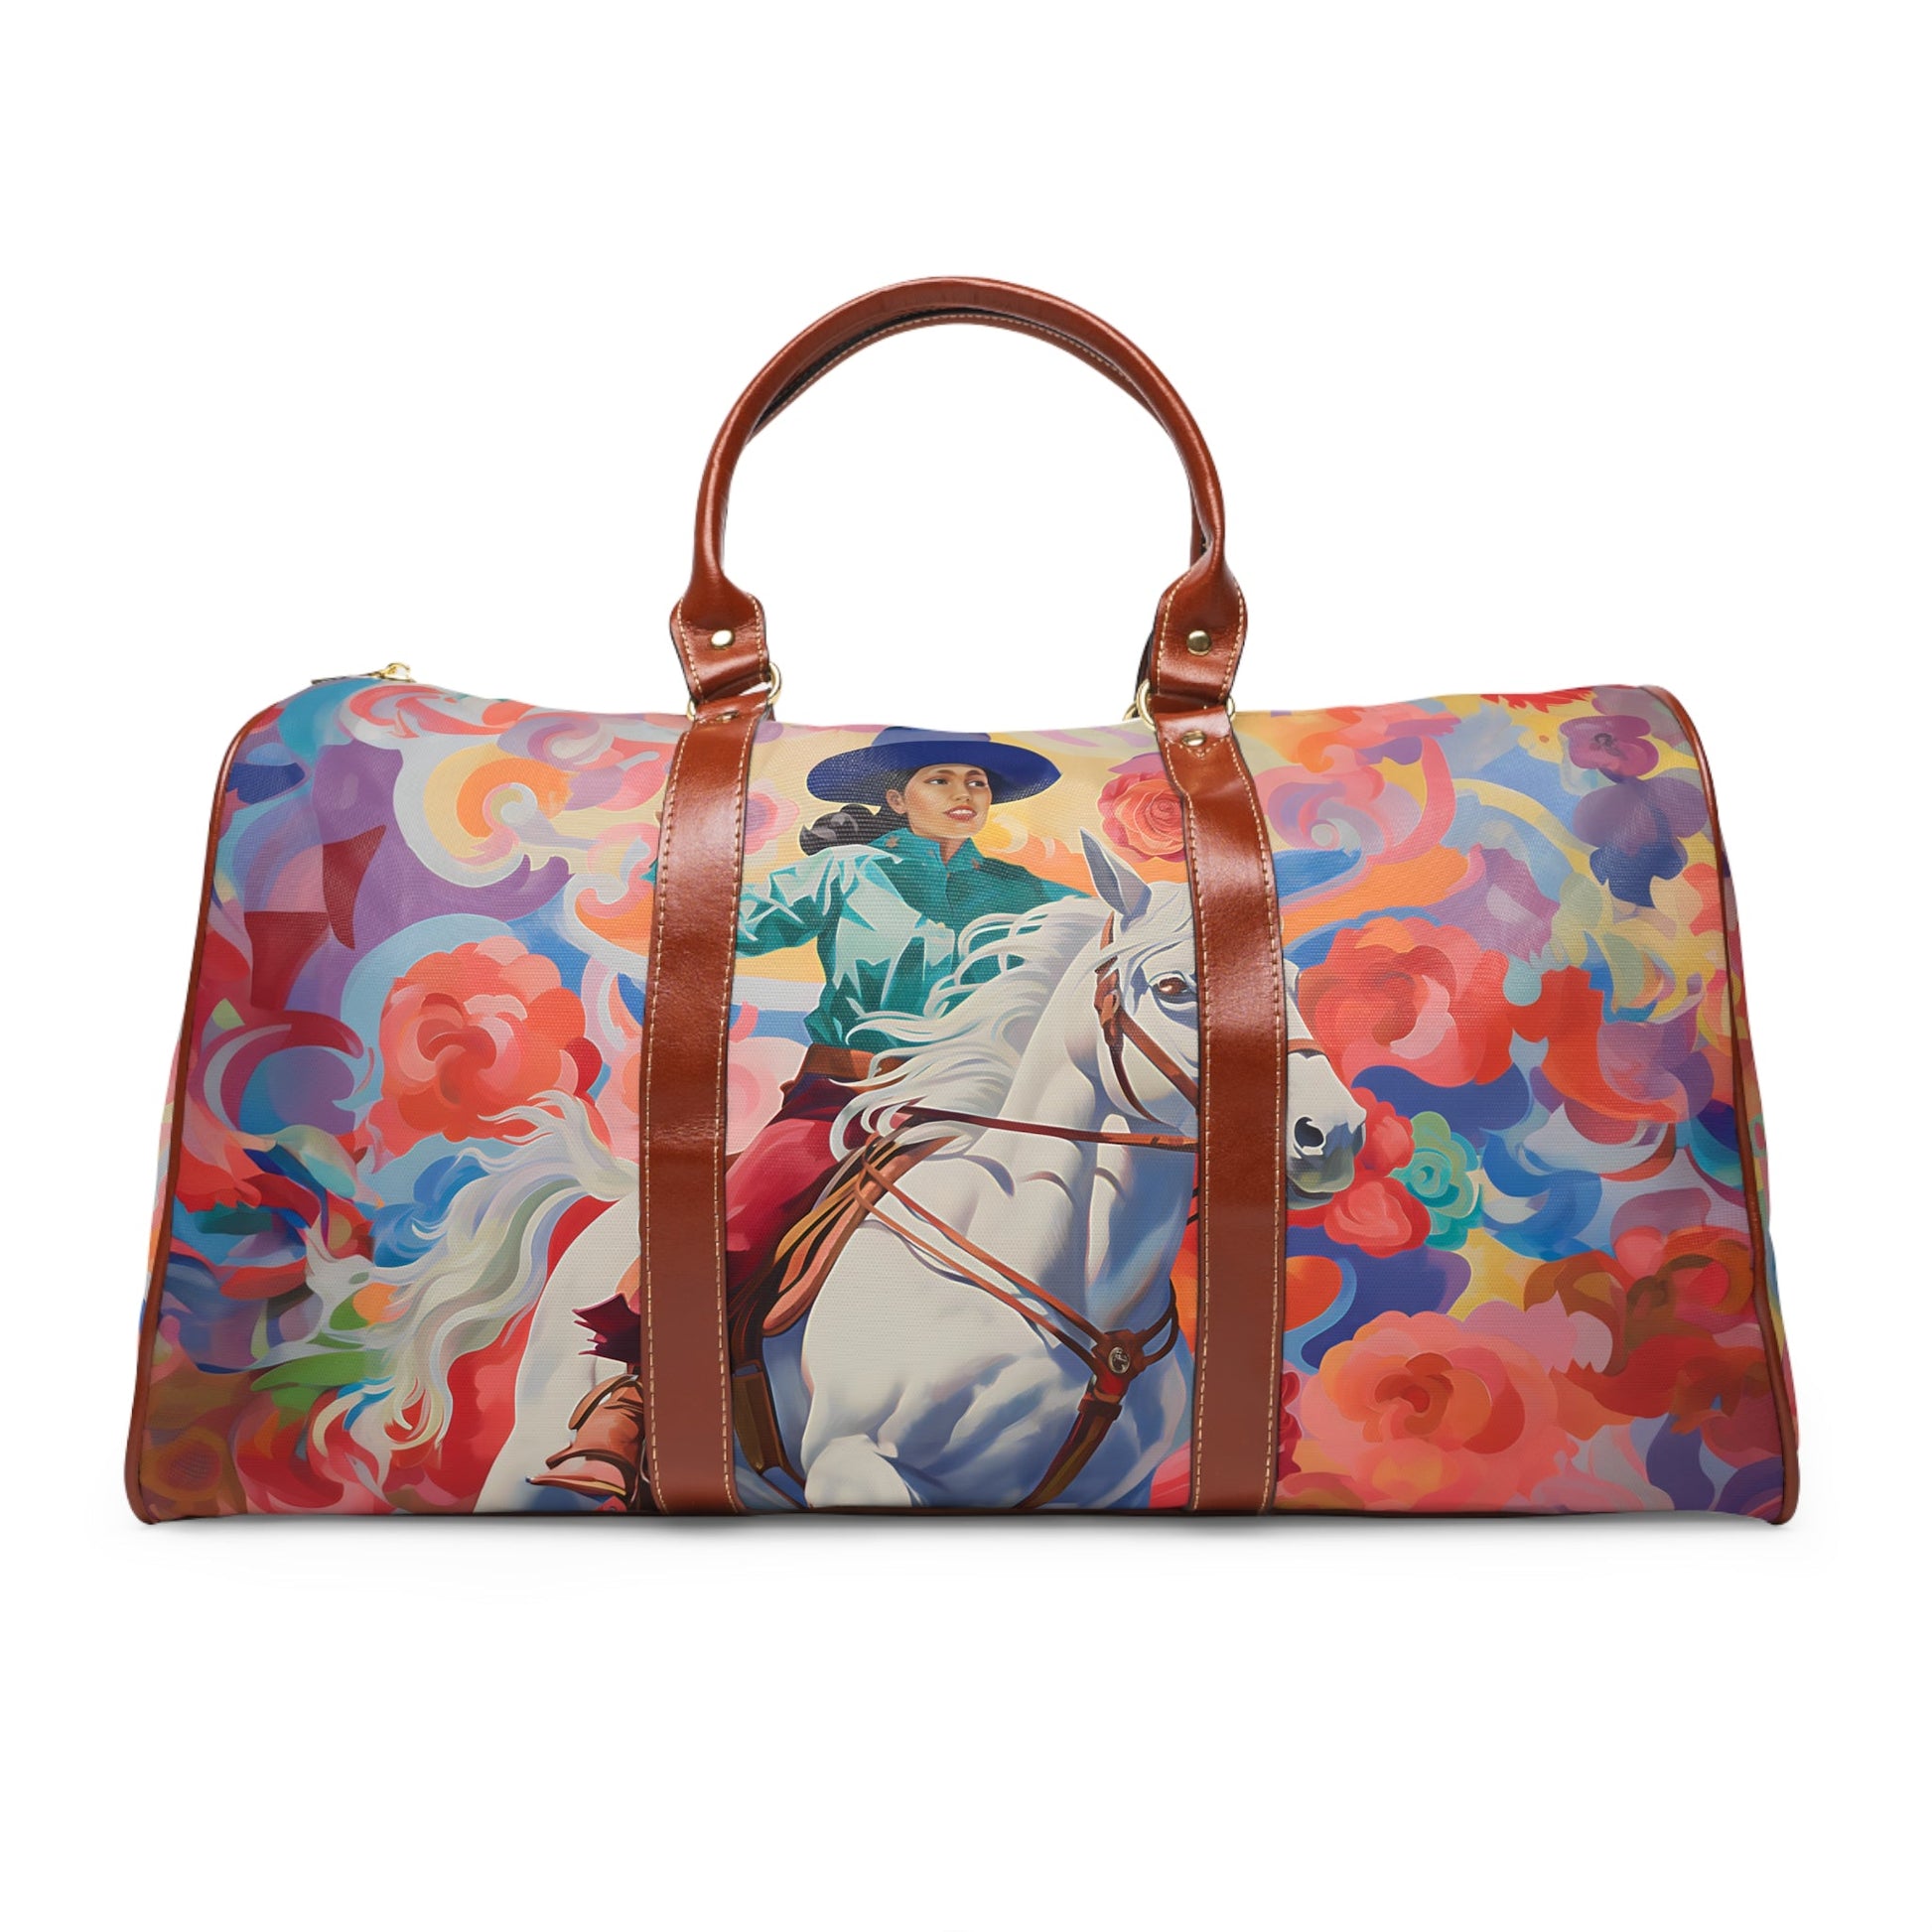 Vintage Cowgirl Art Travel Bag - Bigger than most duffle bags, tote bags and even most weekender bags!